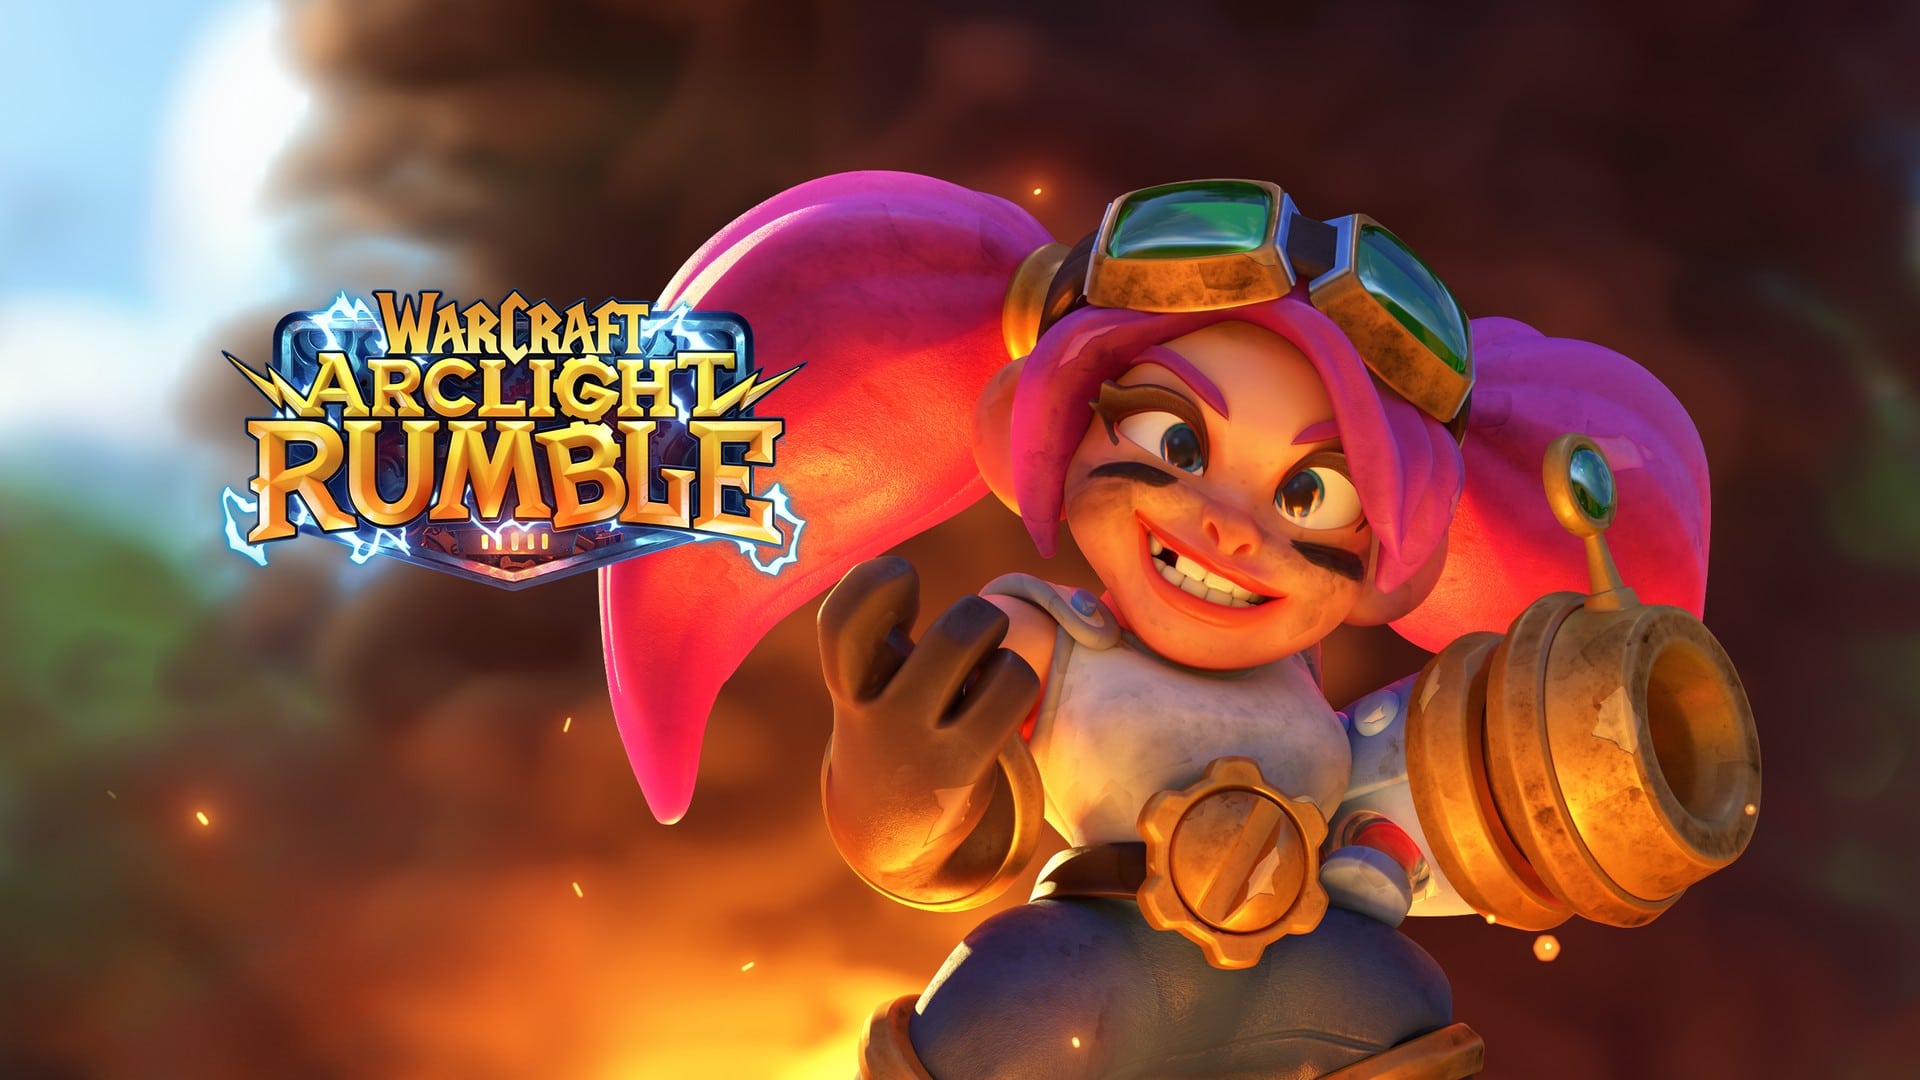 Video Game Warcraft Arclight Rumble 1920x1080